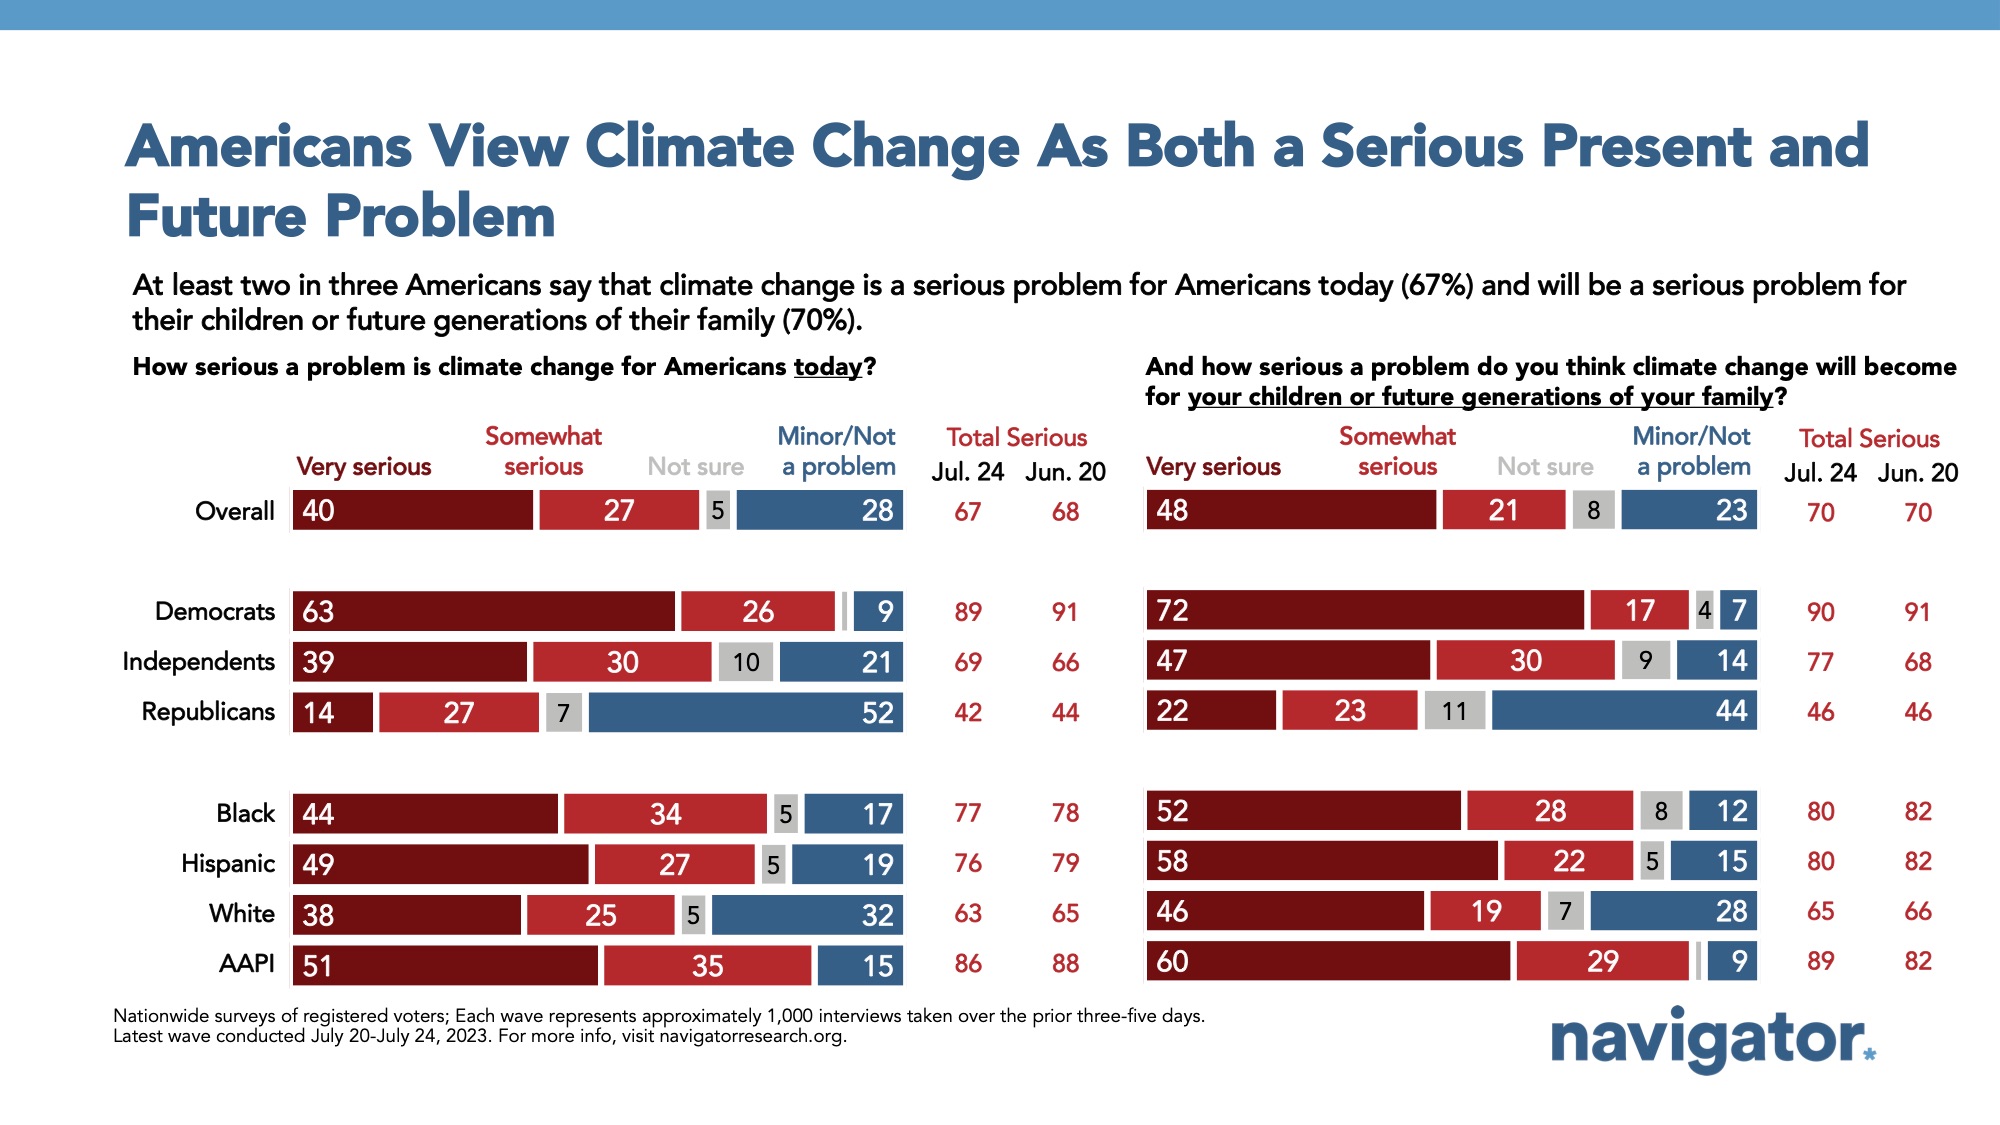 Survey results to the following prompts: How serious a problem is climate change for Americans today? And how serious a problem do you think climate change will become for your children or future generations of your family?